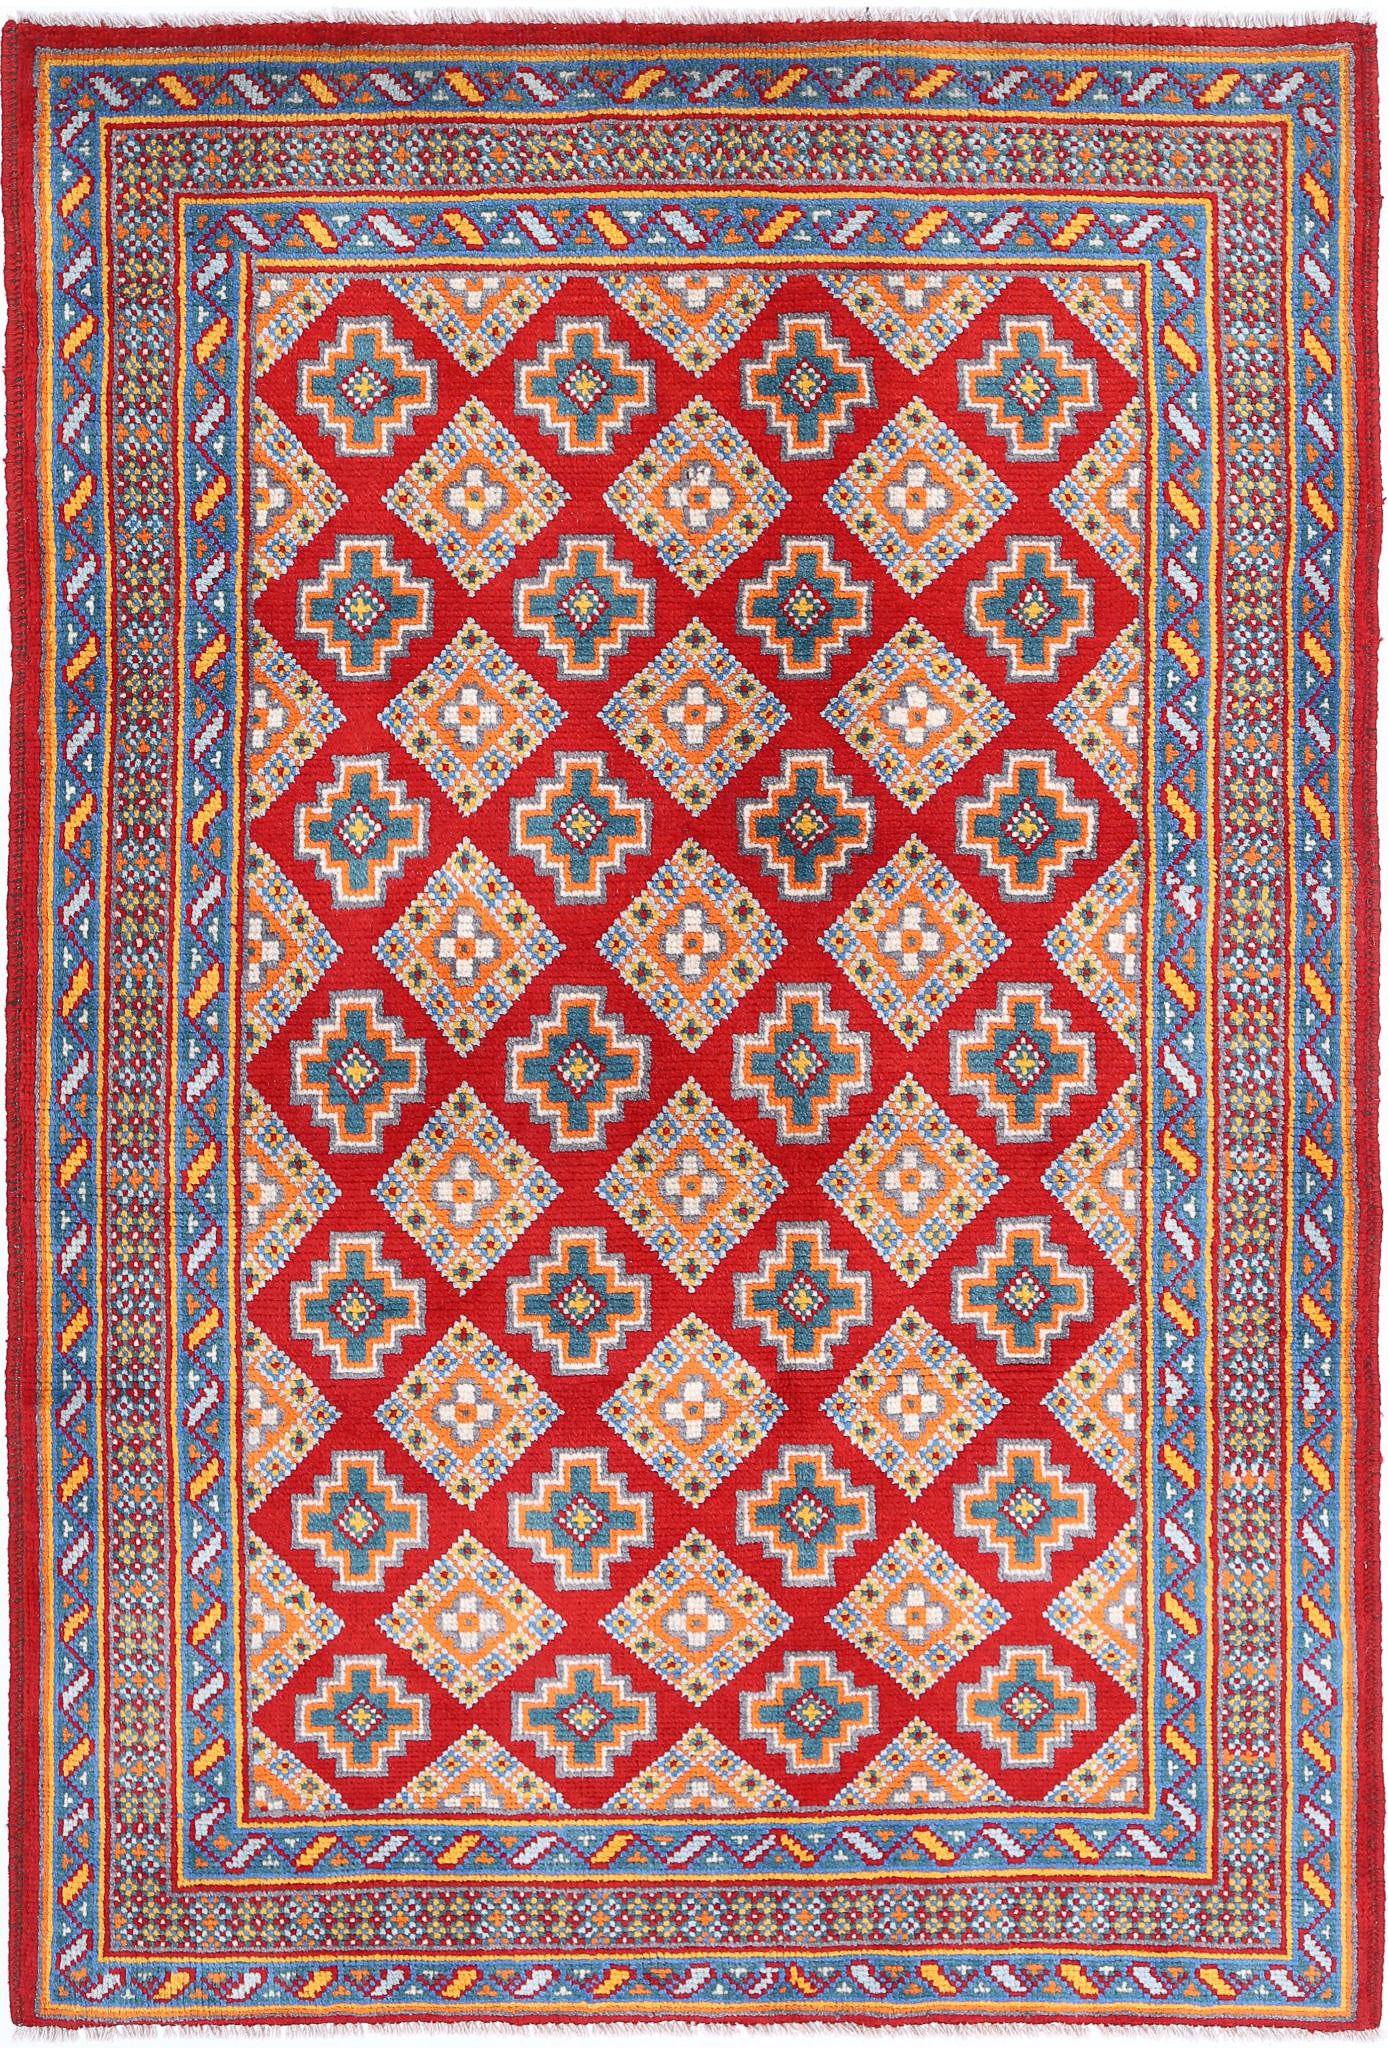 Revival-hand-knotted-qarghani-wool-rug-5014214.jpg